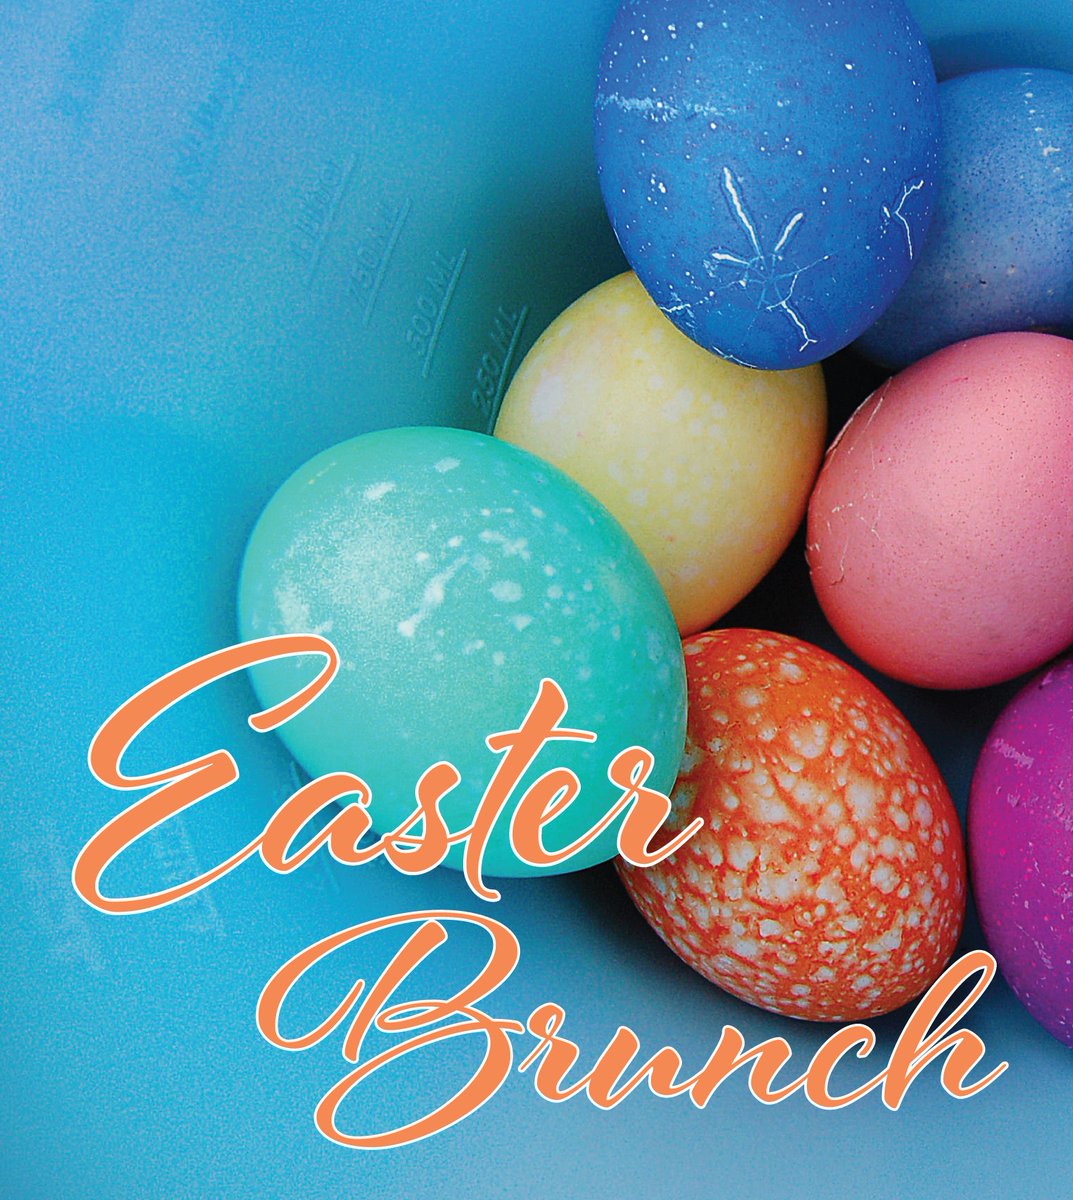 Join us @MiradoroResto 11AM - 3PM Sunday, Apr 12 for our eggcellent #EasterBrunch call 250-498-3742 or email info@miradoro.ca to reserve your spot today! #locallysourced #winerydining #MiradoroDoesIt